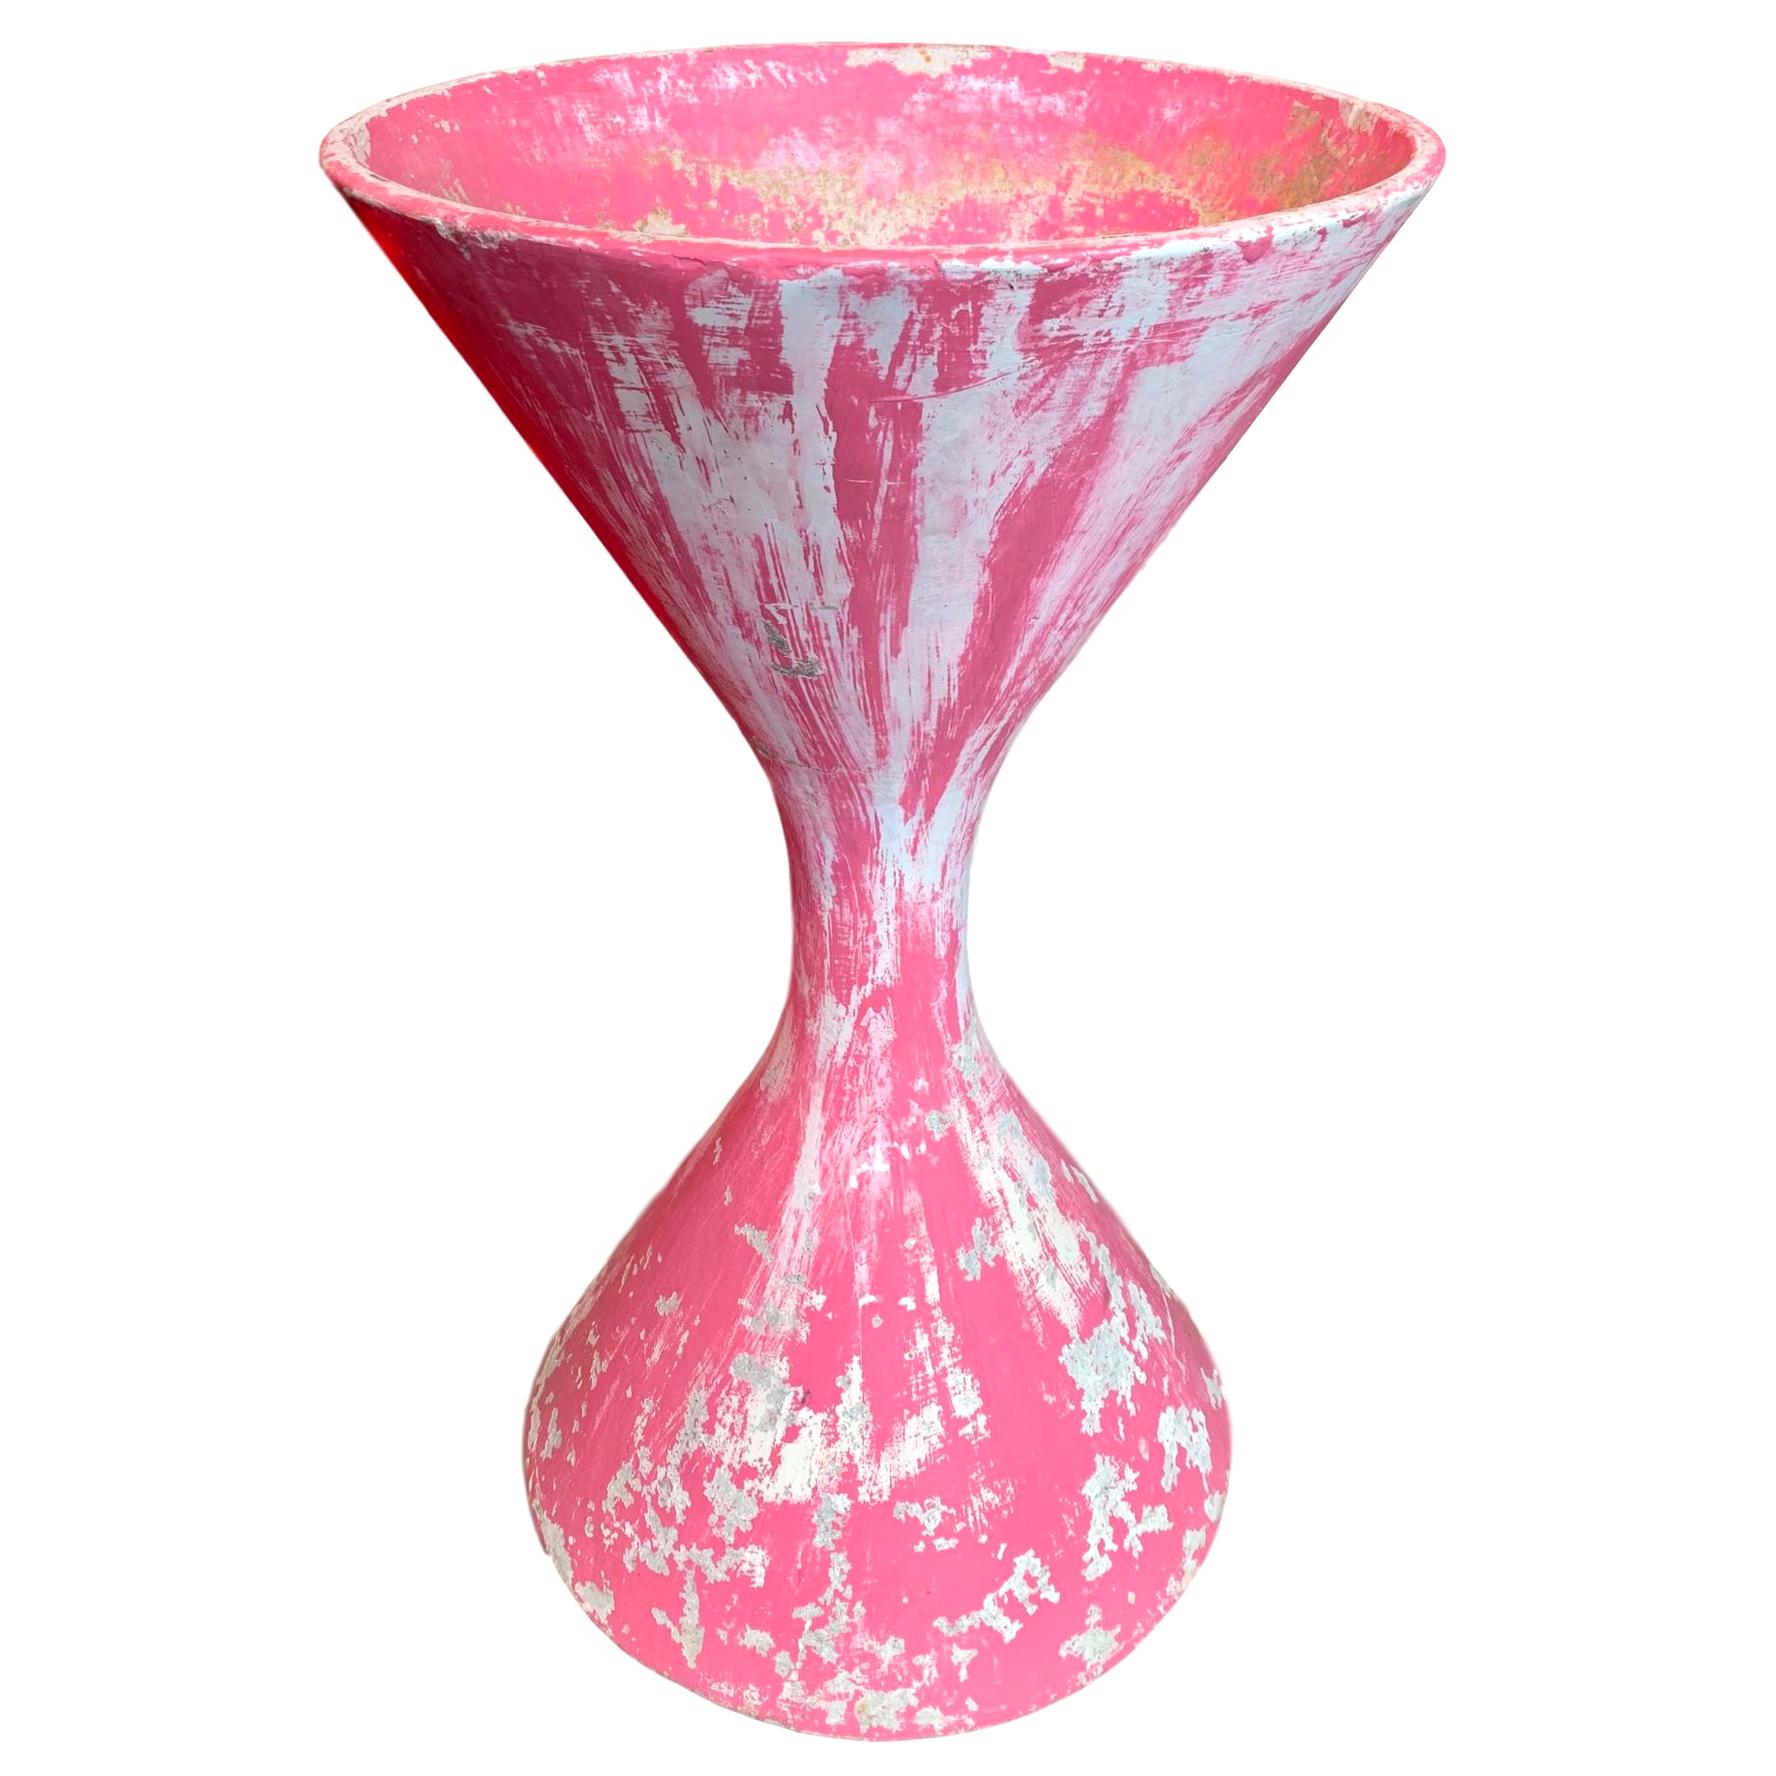 Pink Diabolo Hourglass Planter by Willy Guhl